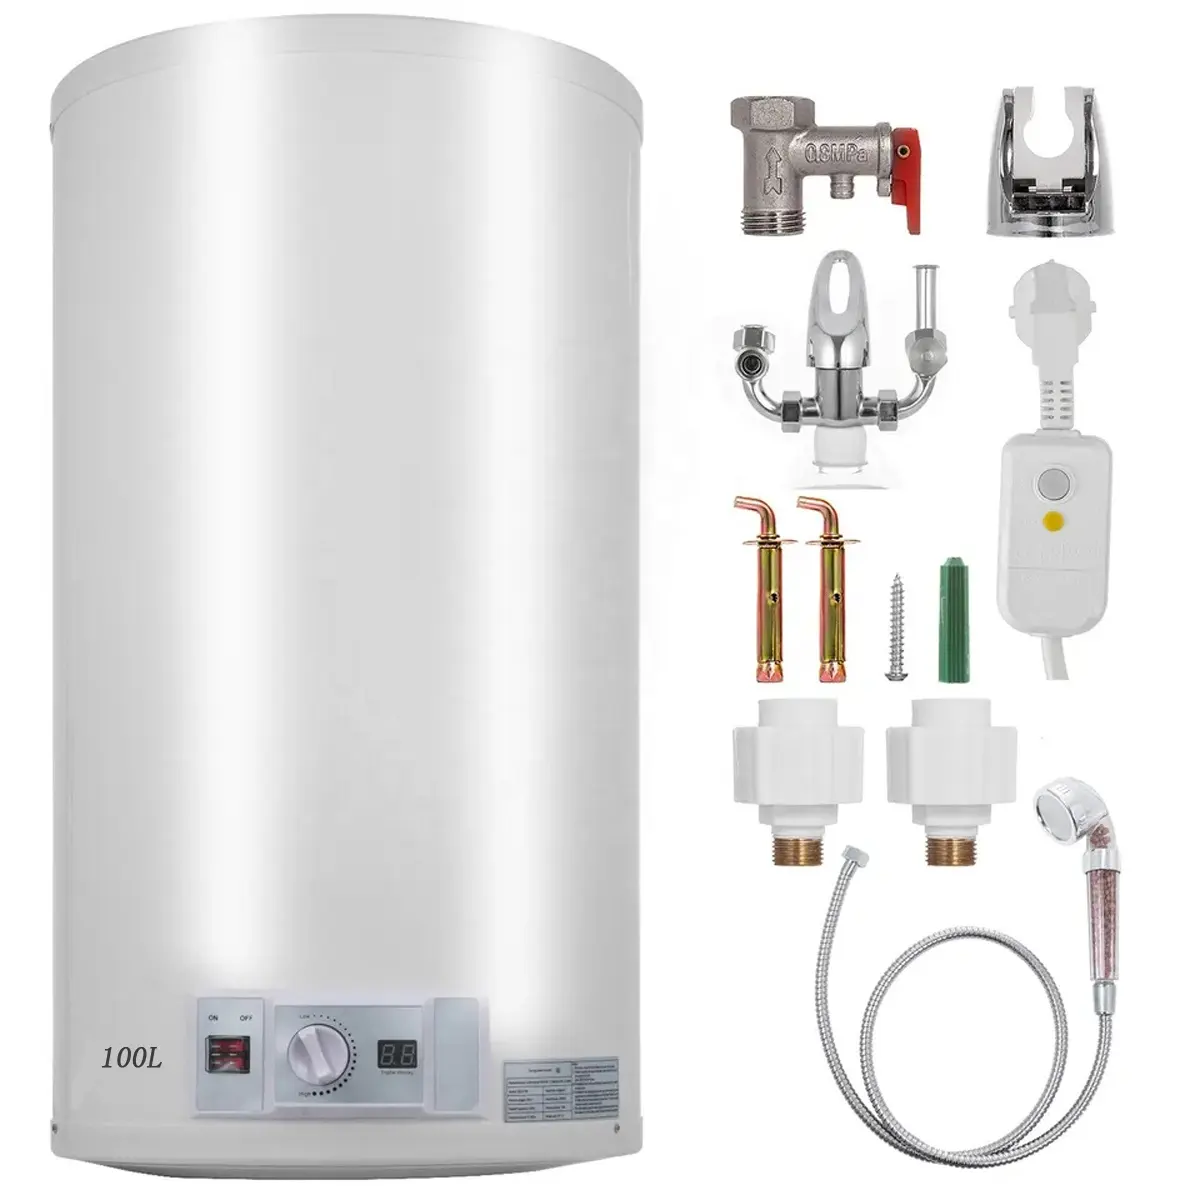 3KW 100L Bathroom Instant Electric Water Heaters